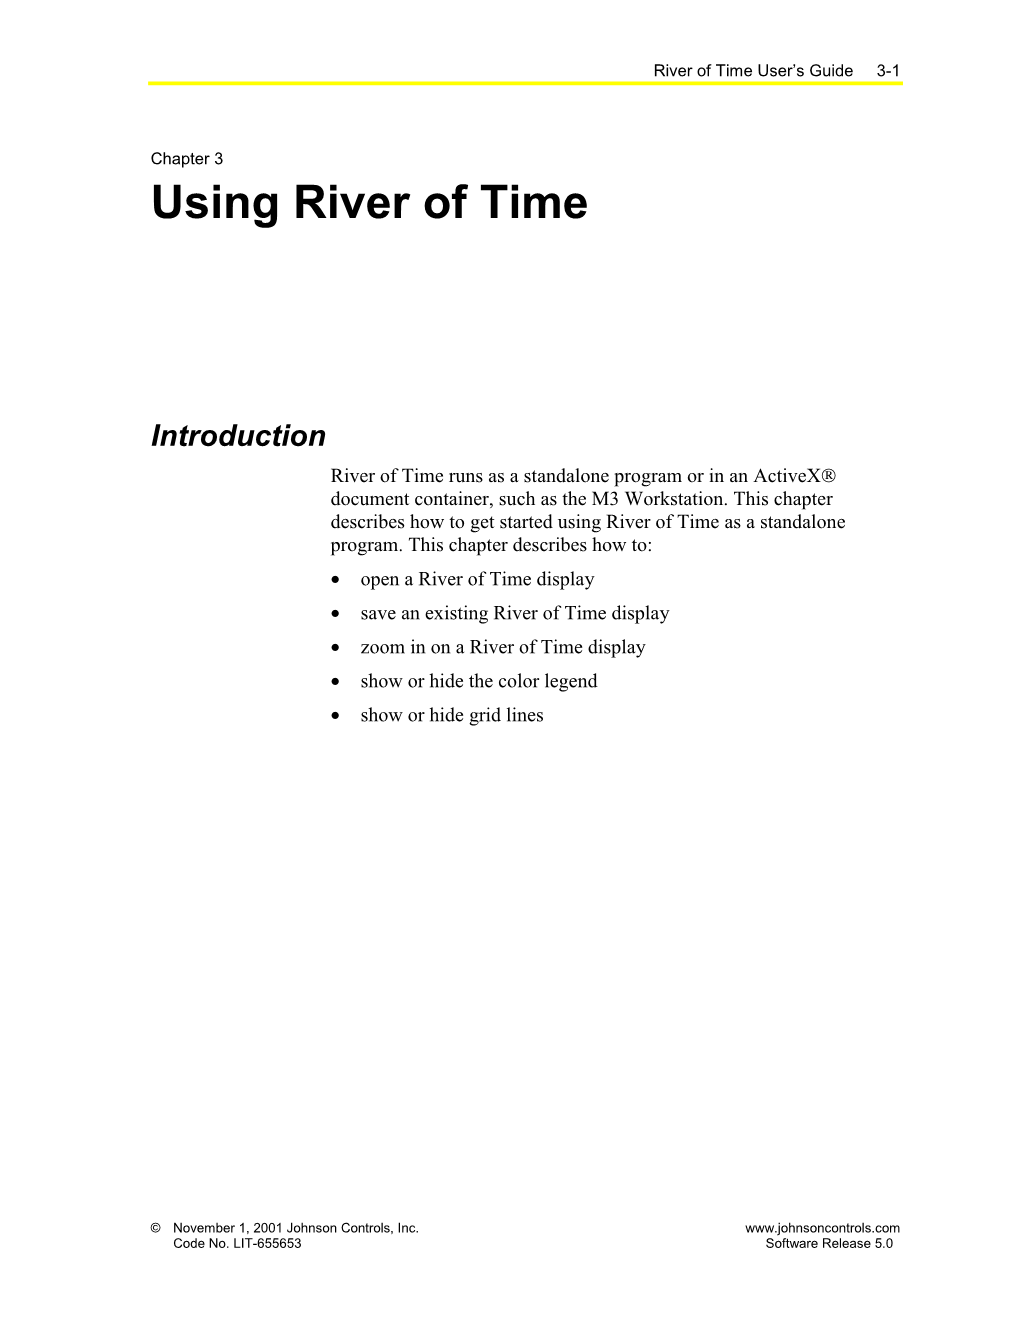 River of Time User's Guide: Chapter 3